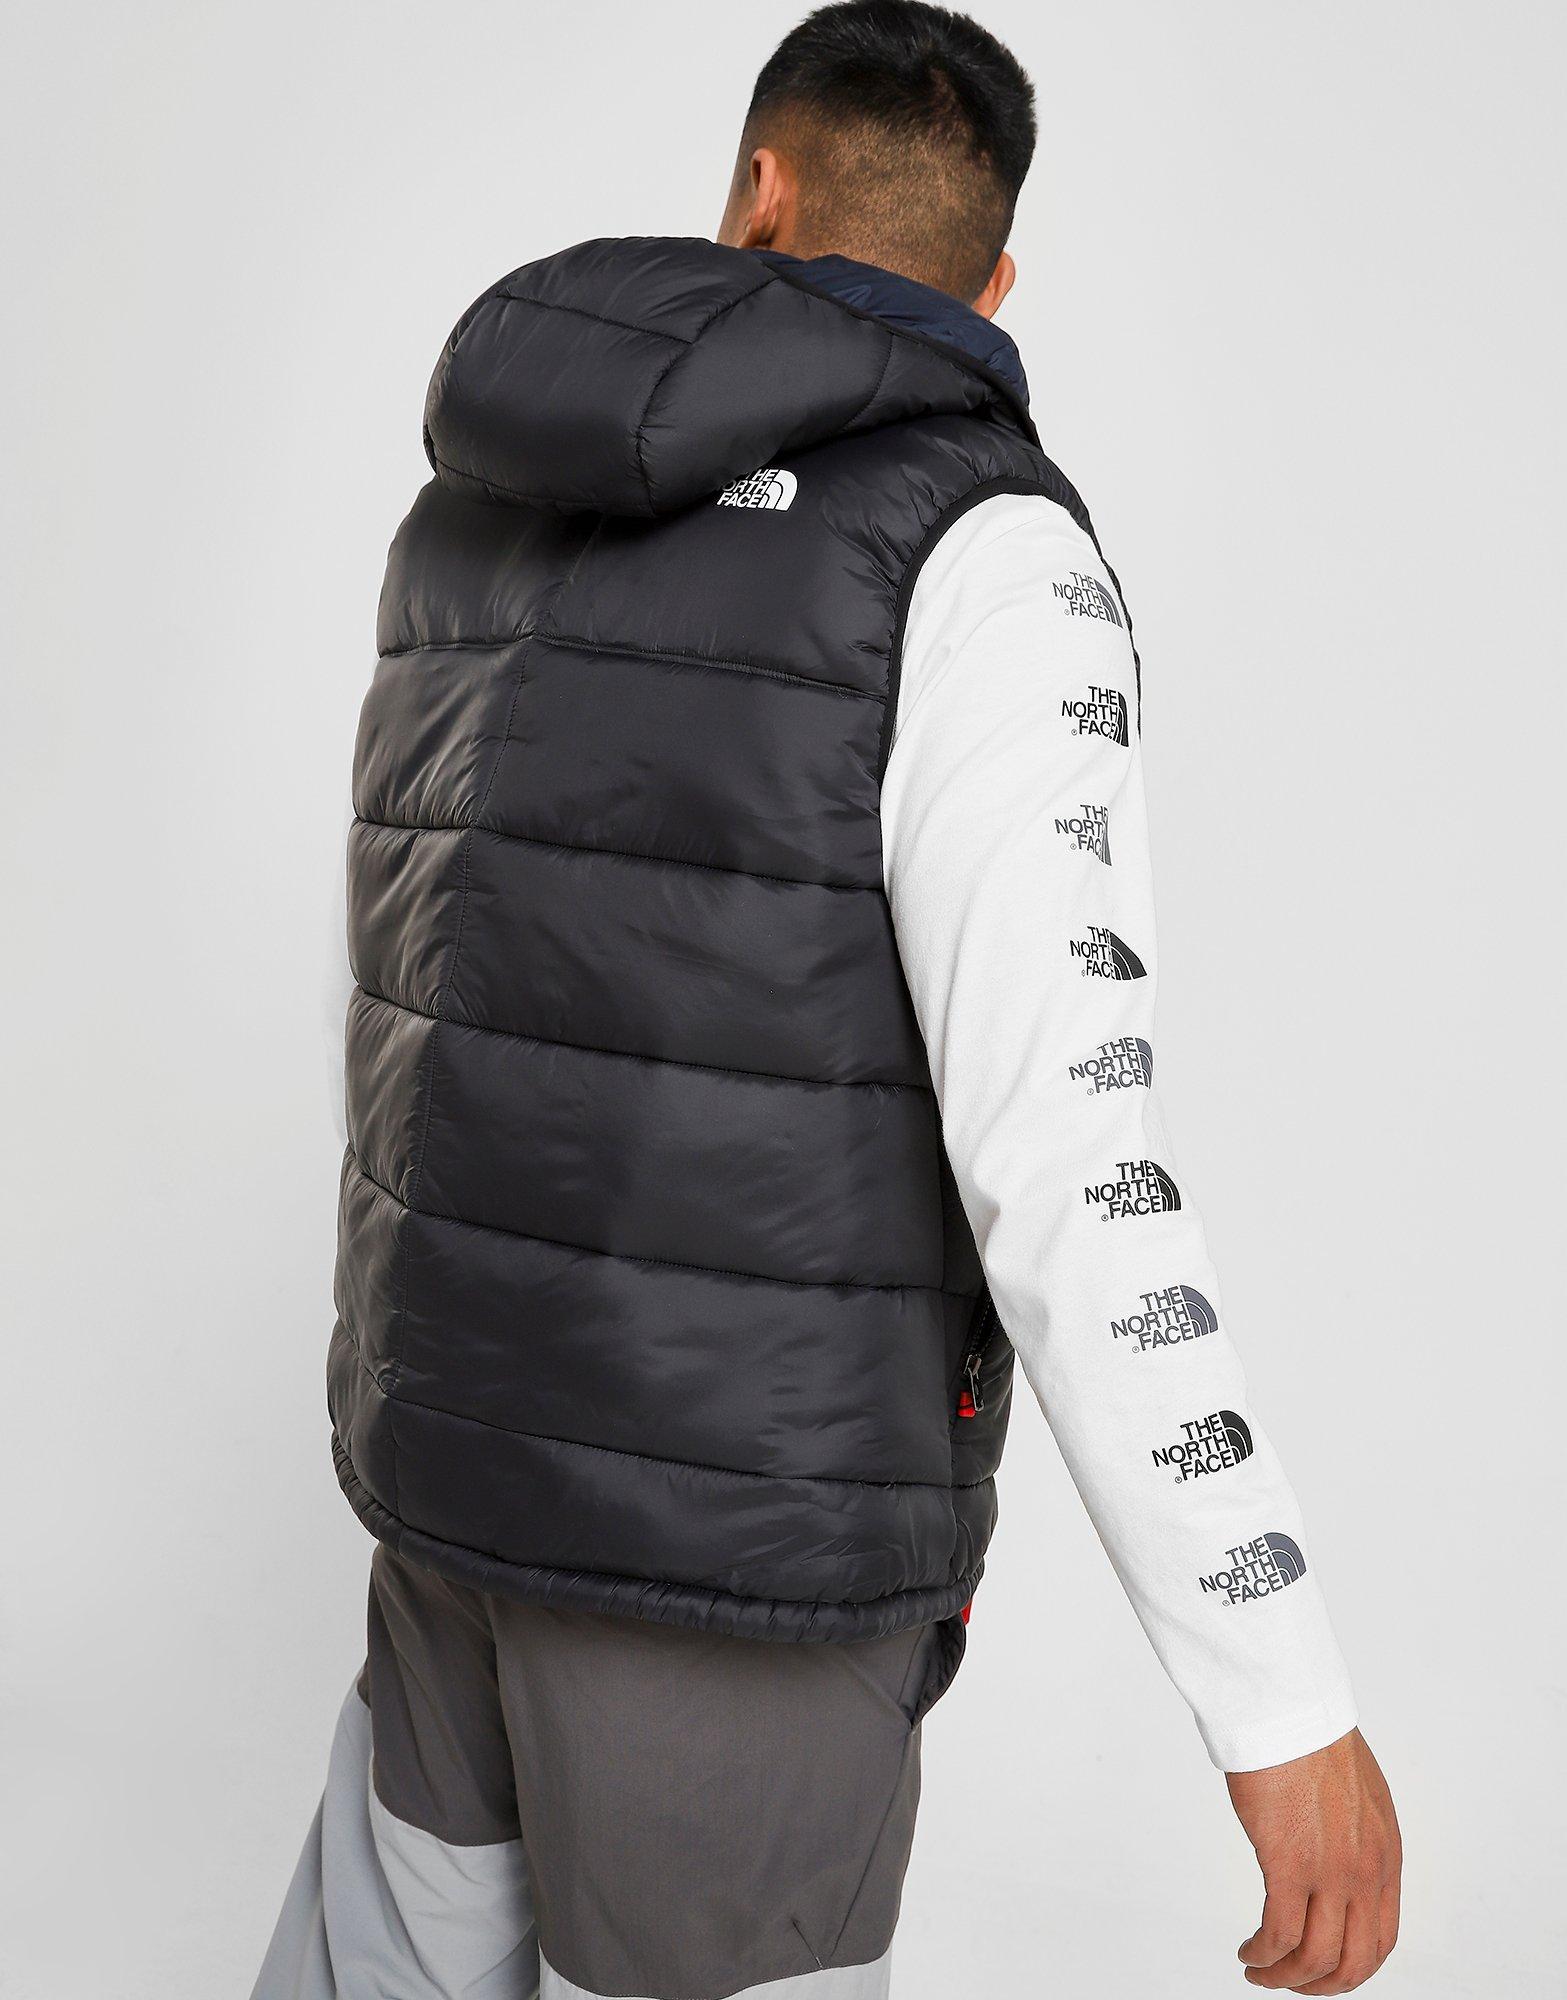 body warmer the north face